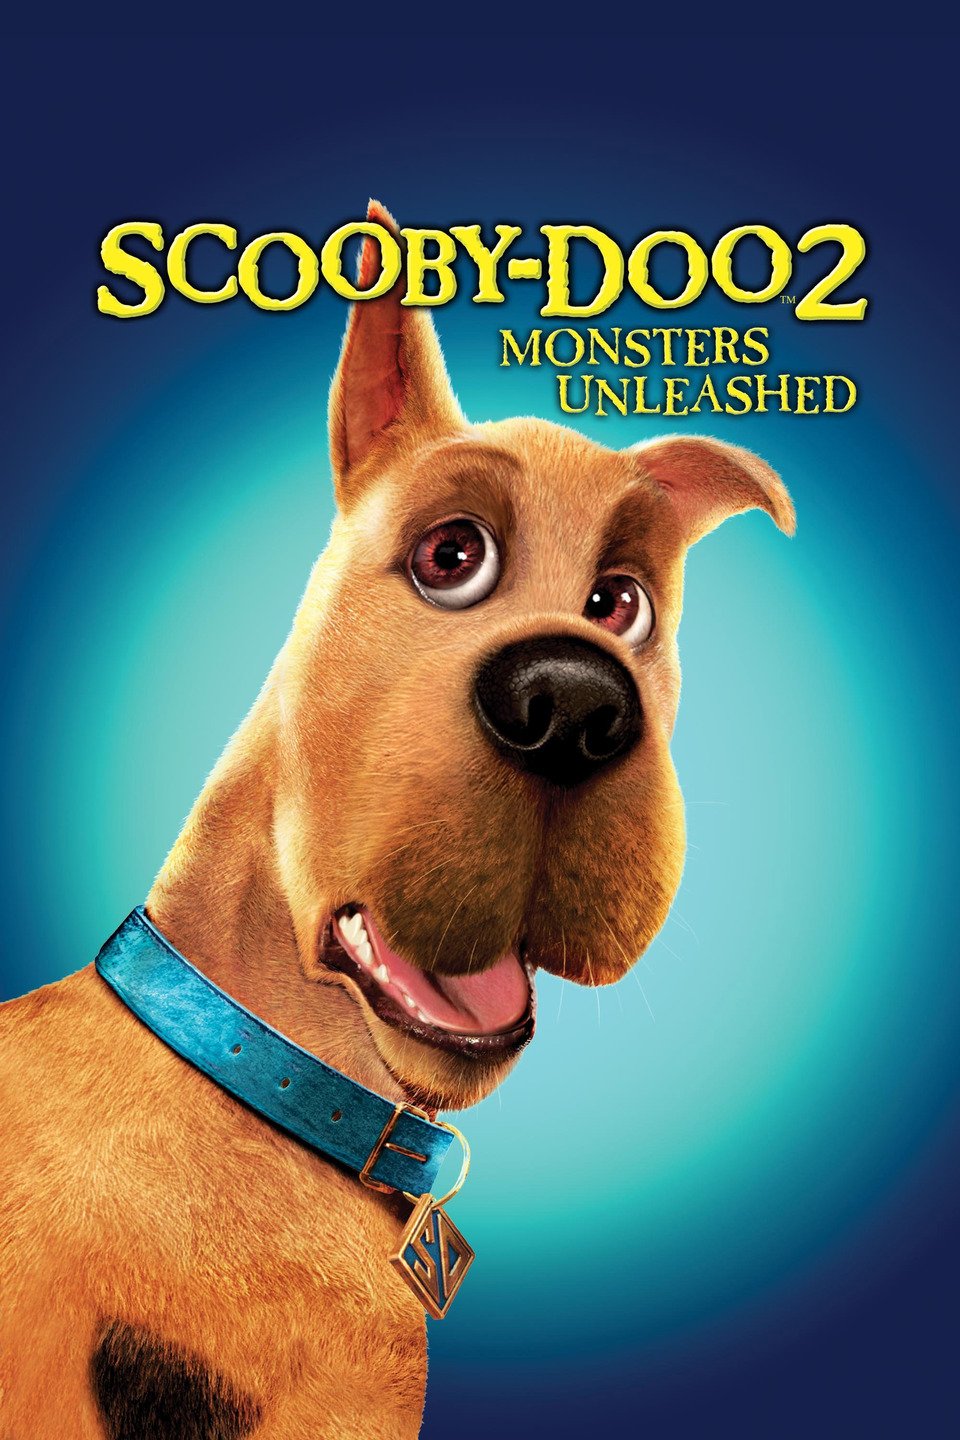 scooby doo movie monsters unleashed